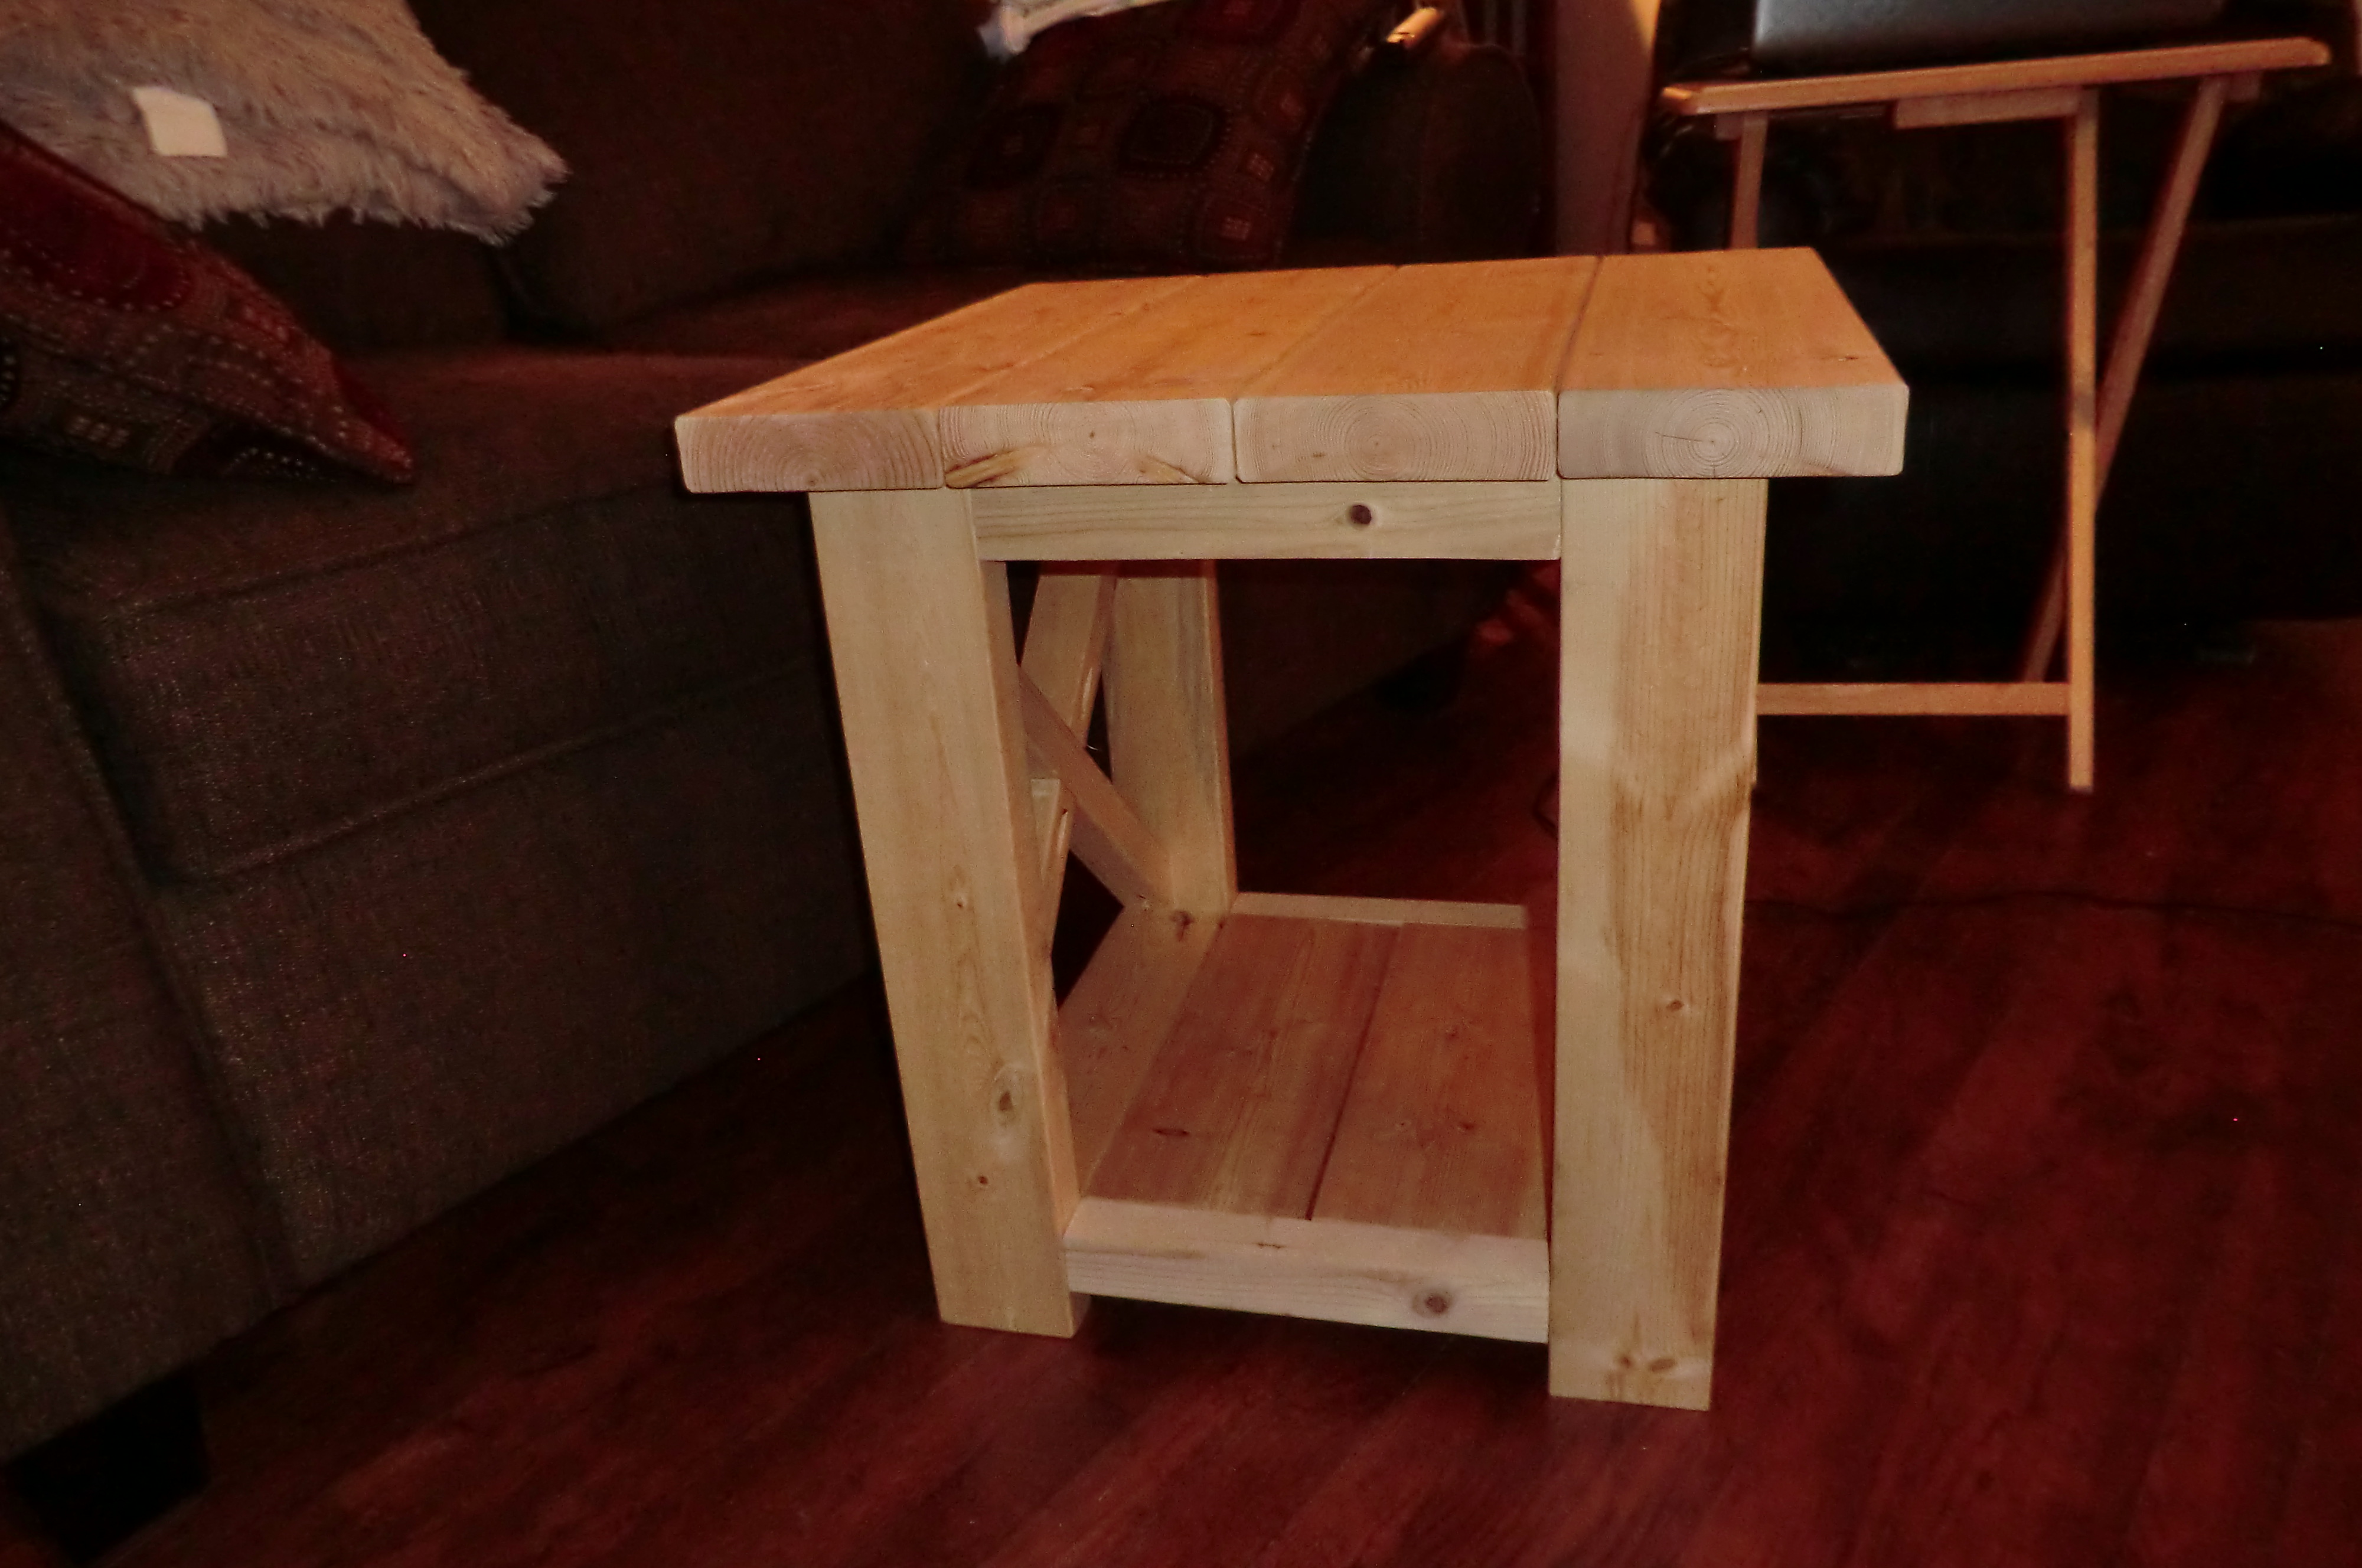 end table plans simple rennie mackintosh the ana white smaller rustic diy projects pdf patio cover kmart baby furniture clearance tro side coffee leons dartmouth nic nesting snack